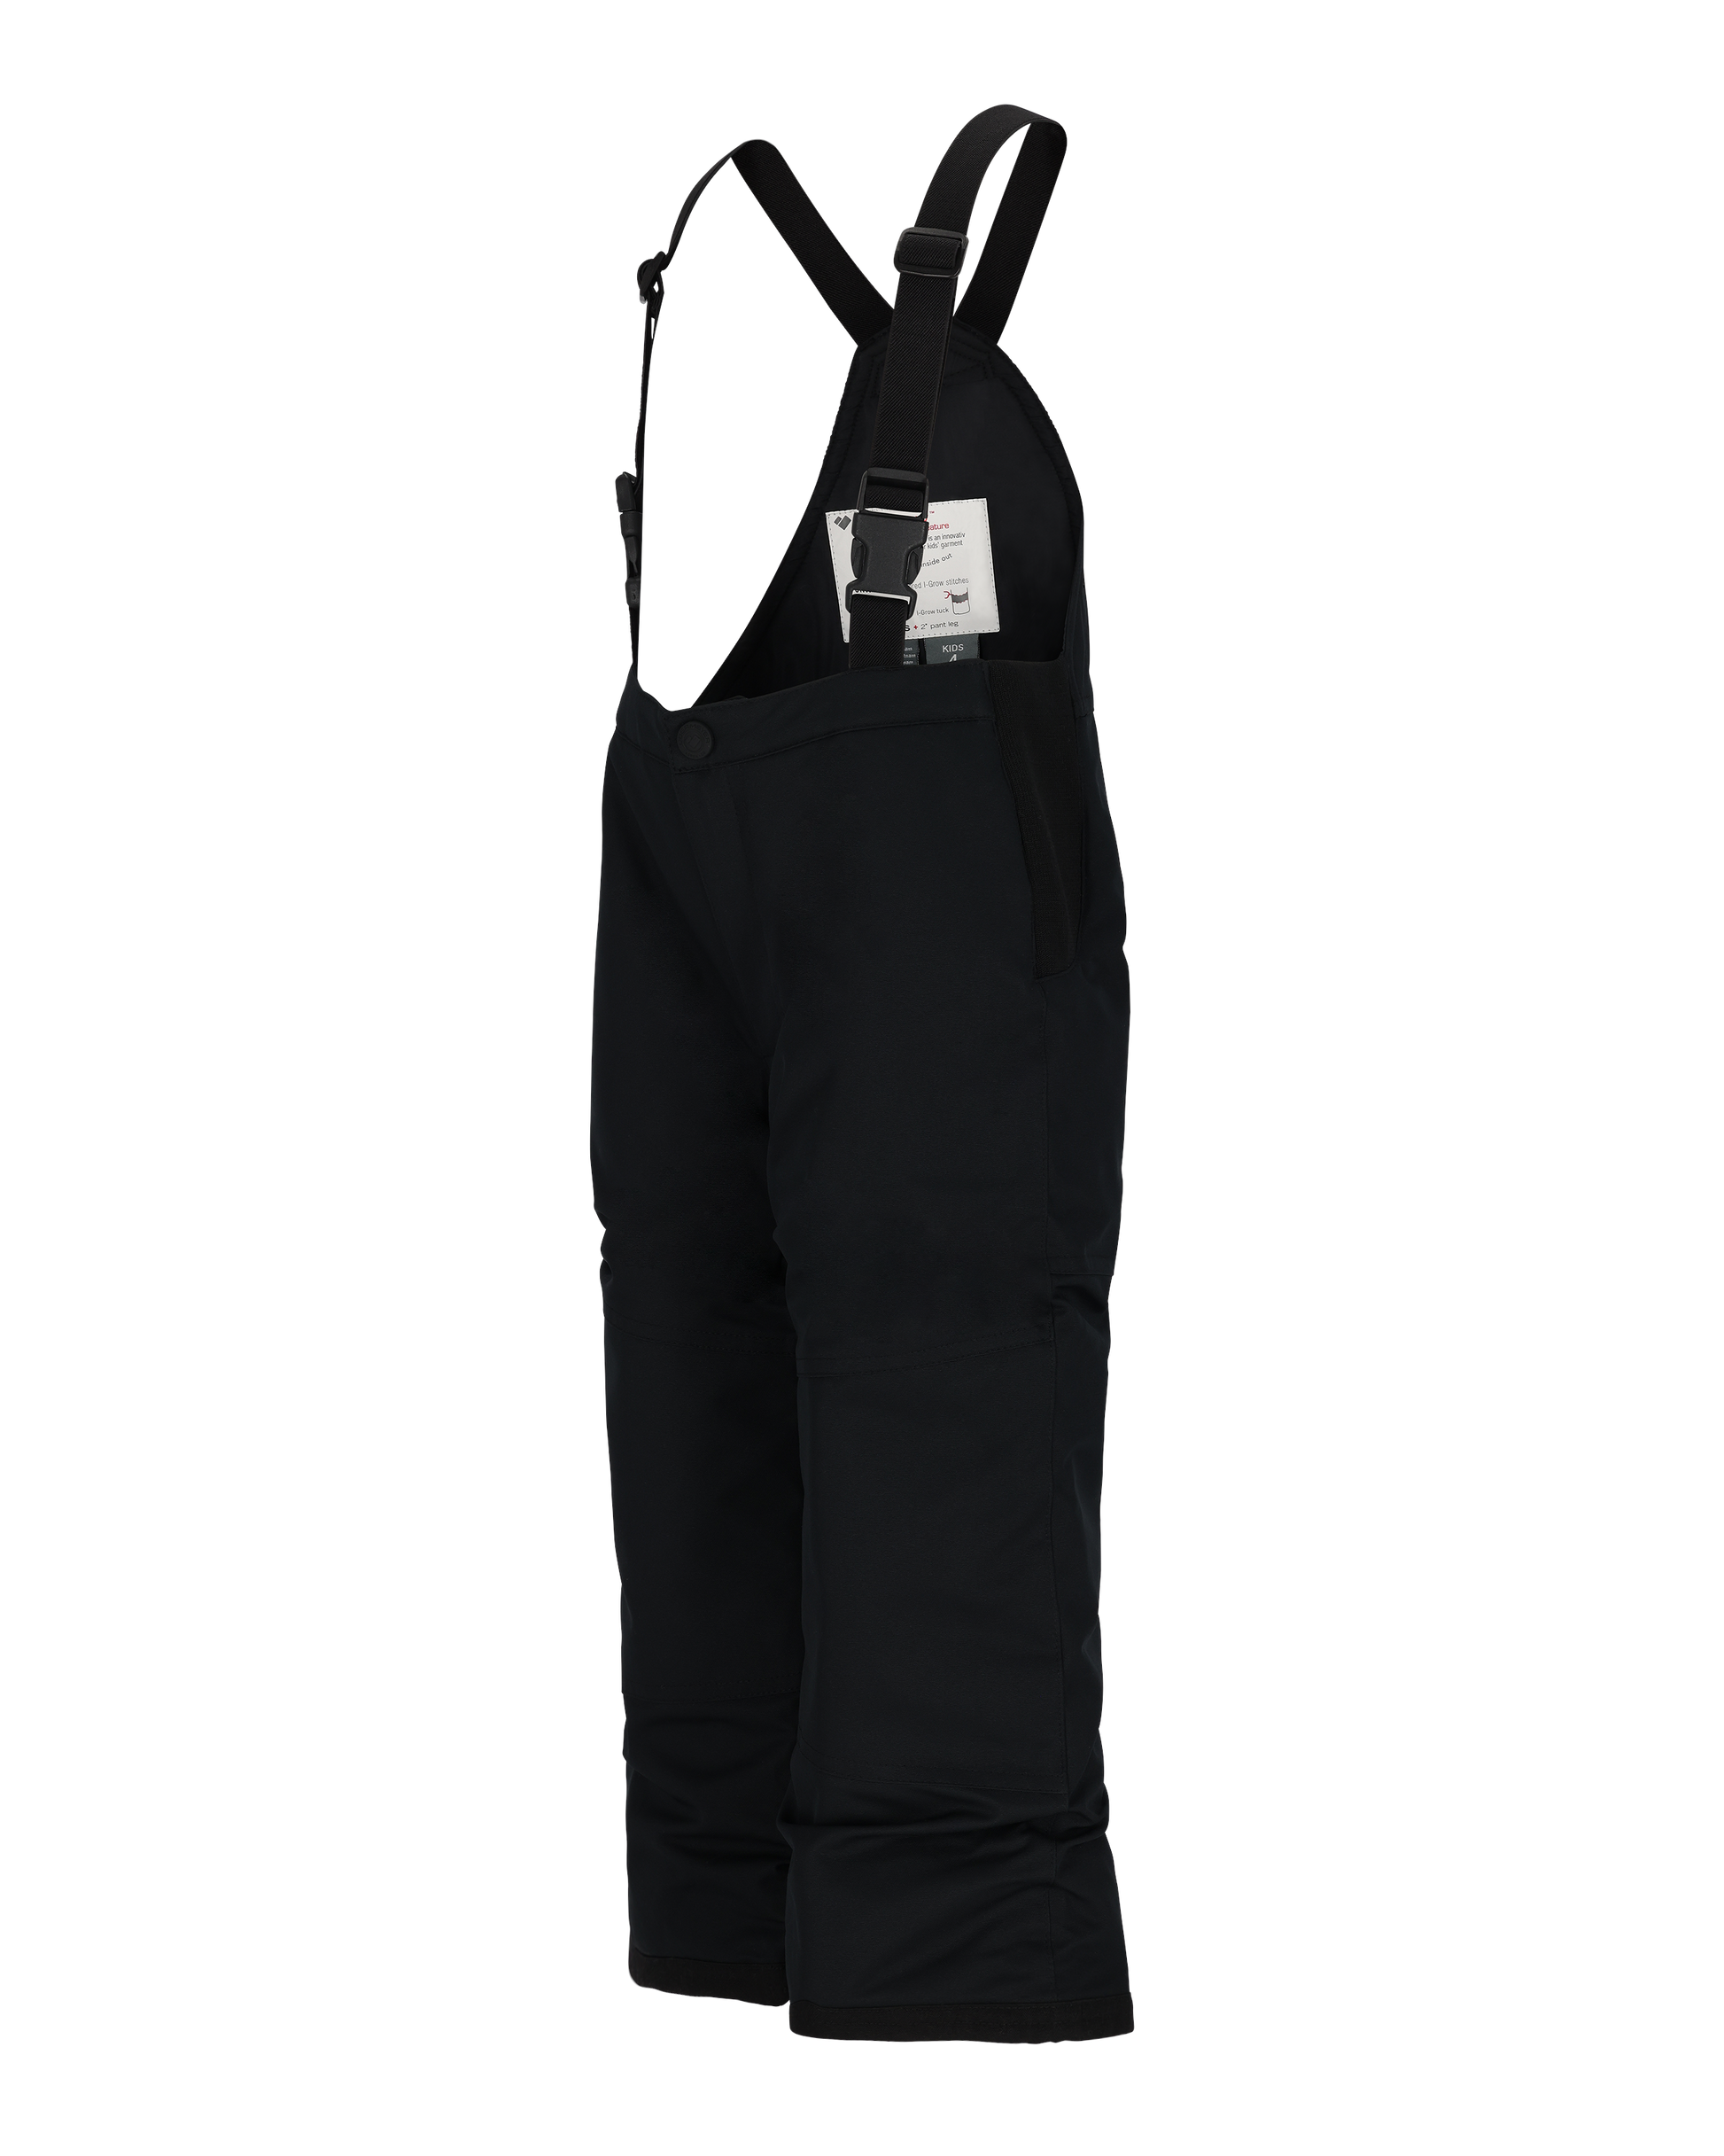 Frosty Suspender Pant